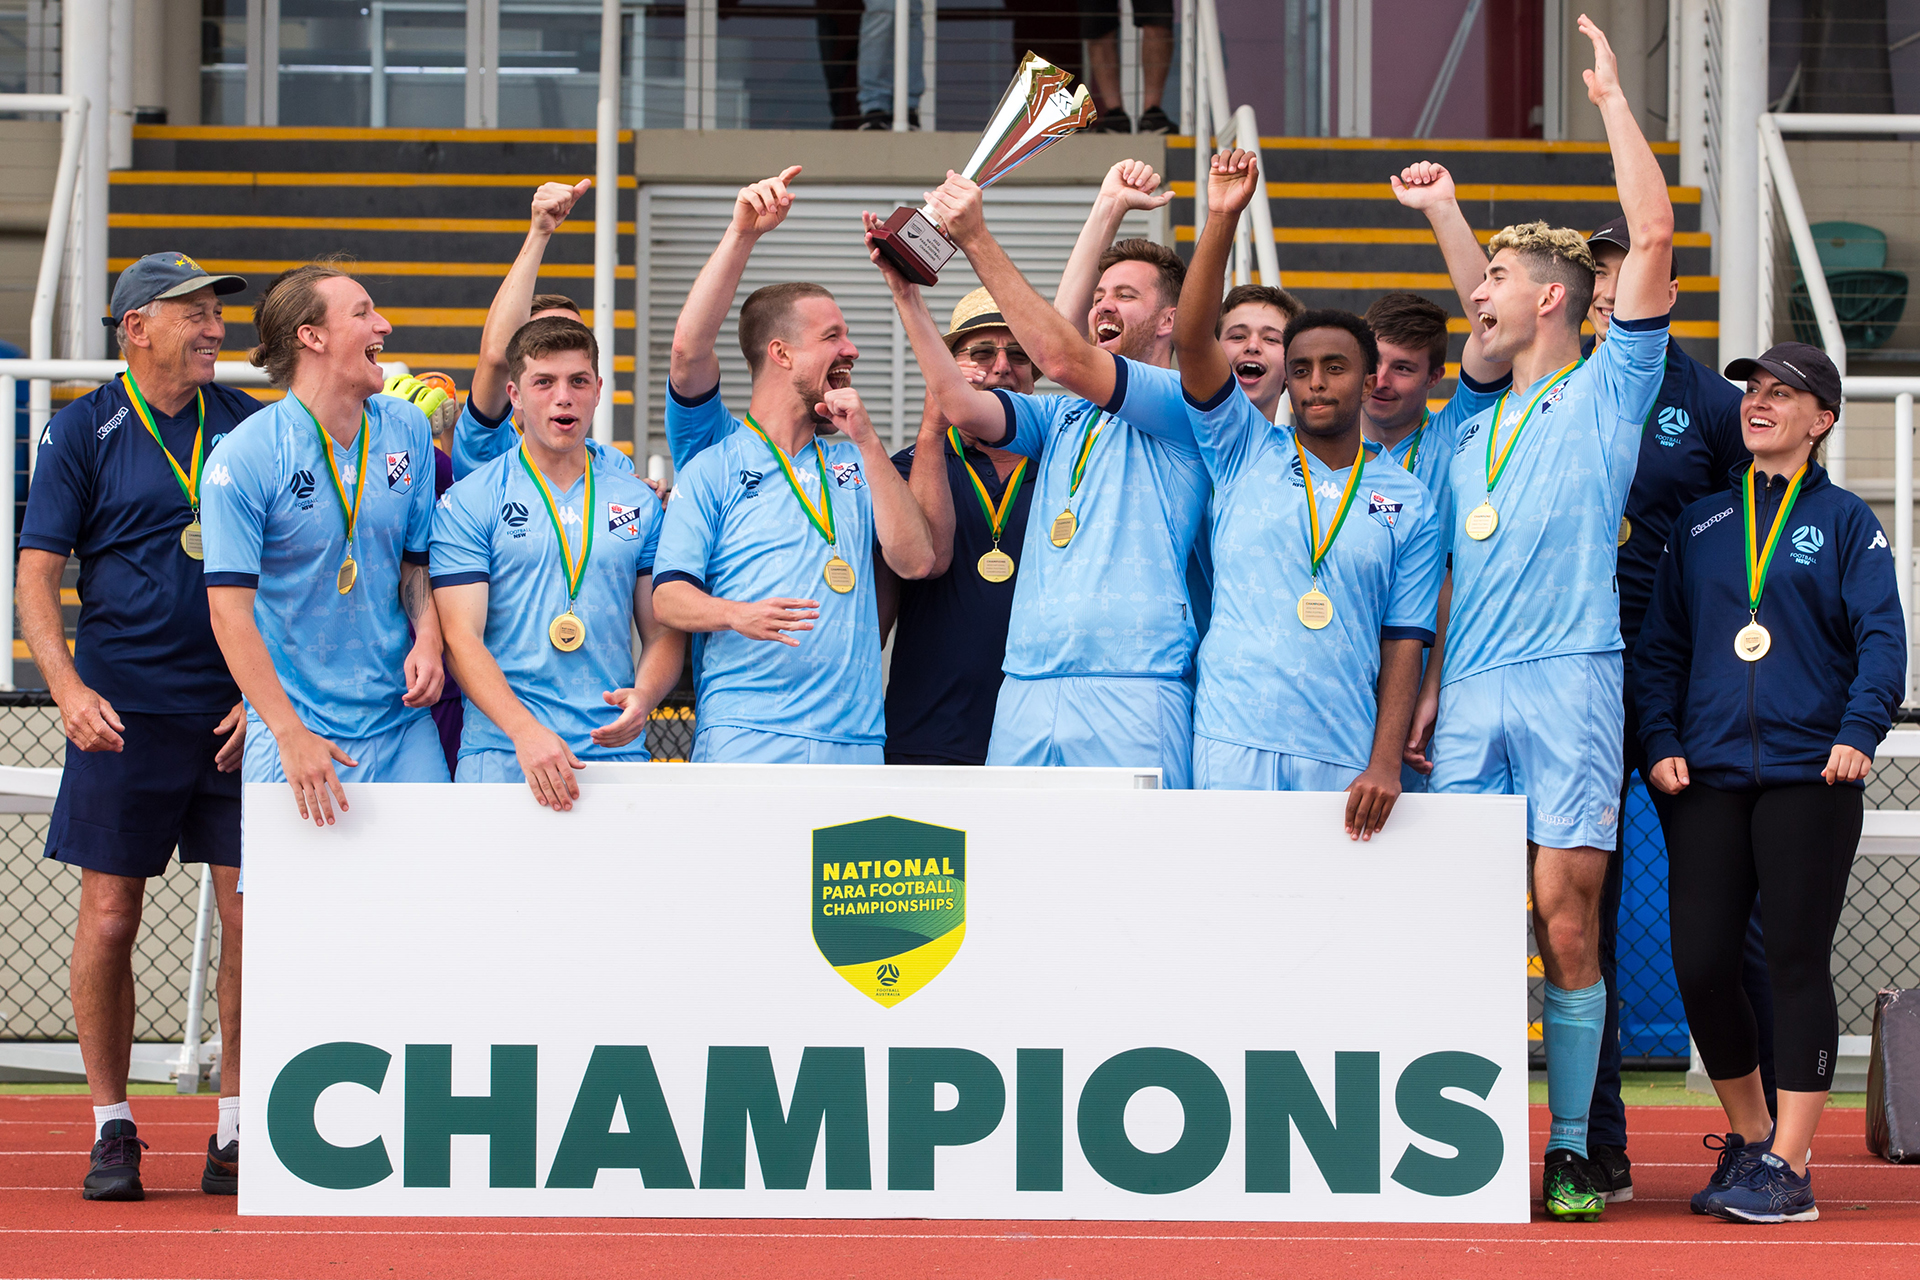 NSW were crowned 2022 National Para Football Champions